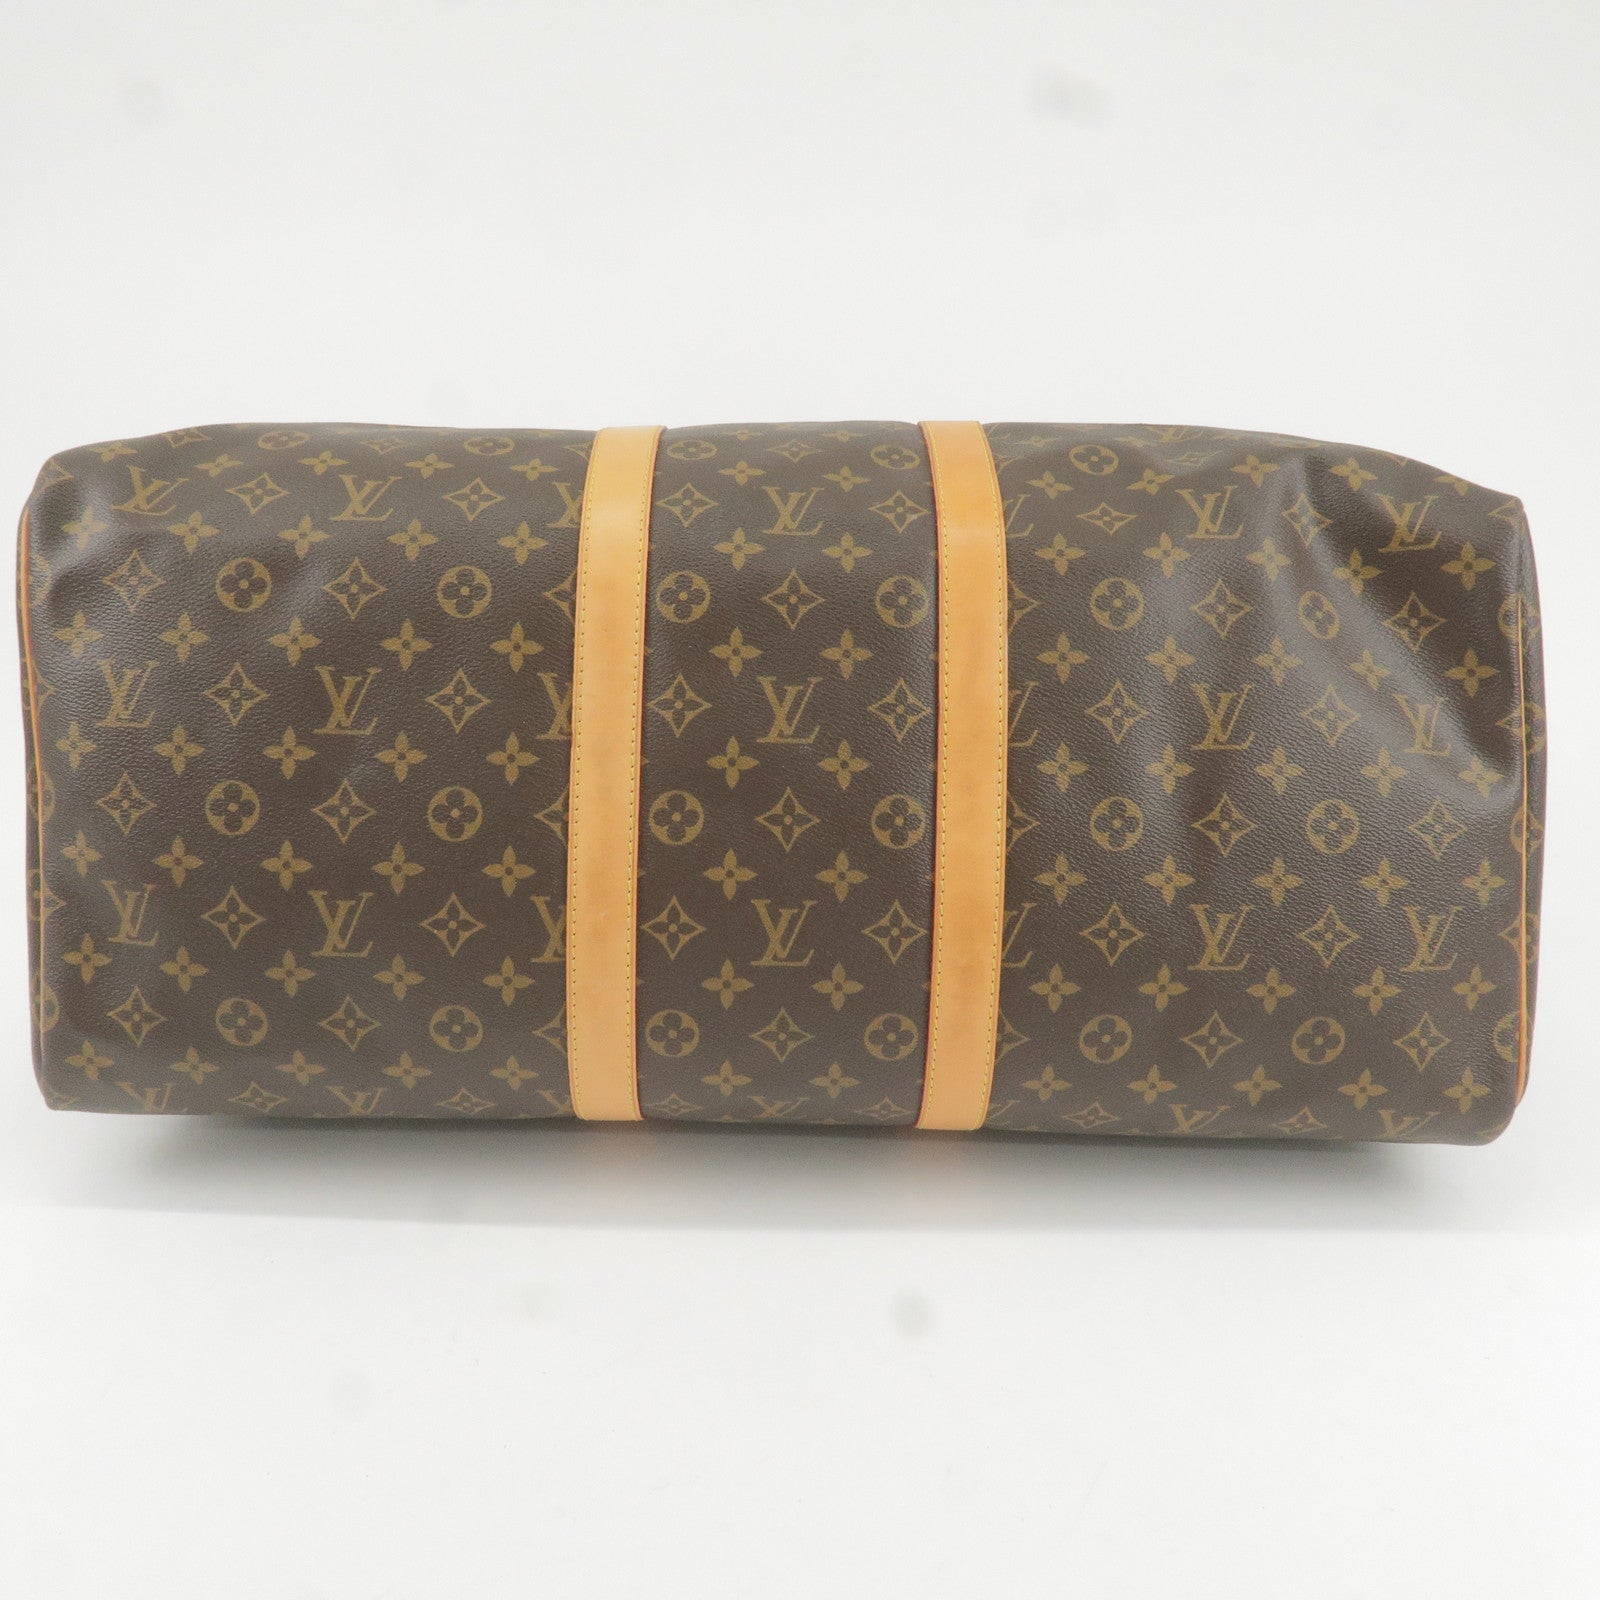 Pre-Loved Louis Vuitton Monogram Canvas Keepall Bag by Pre-Loved